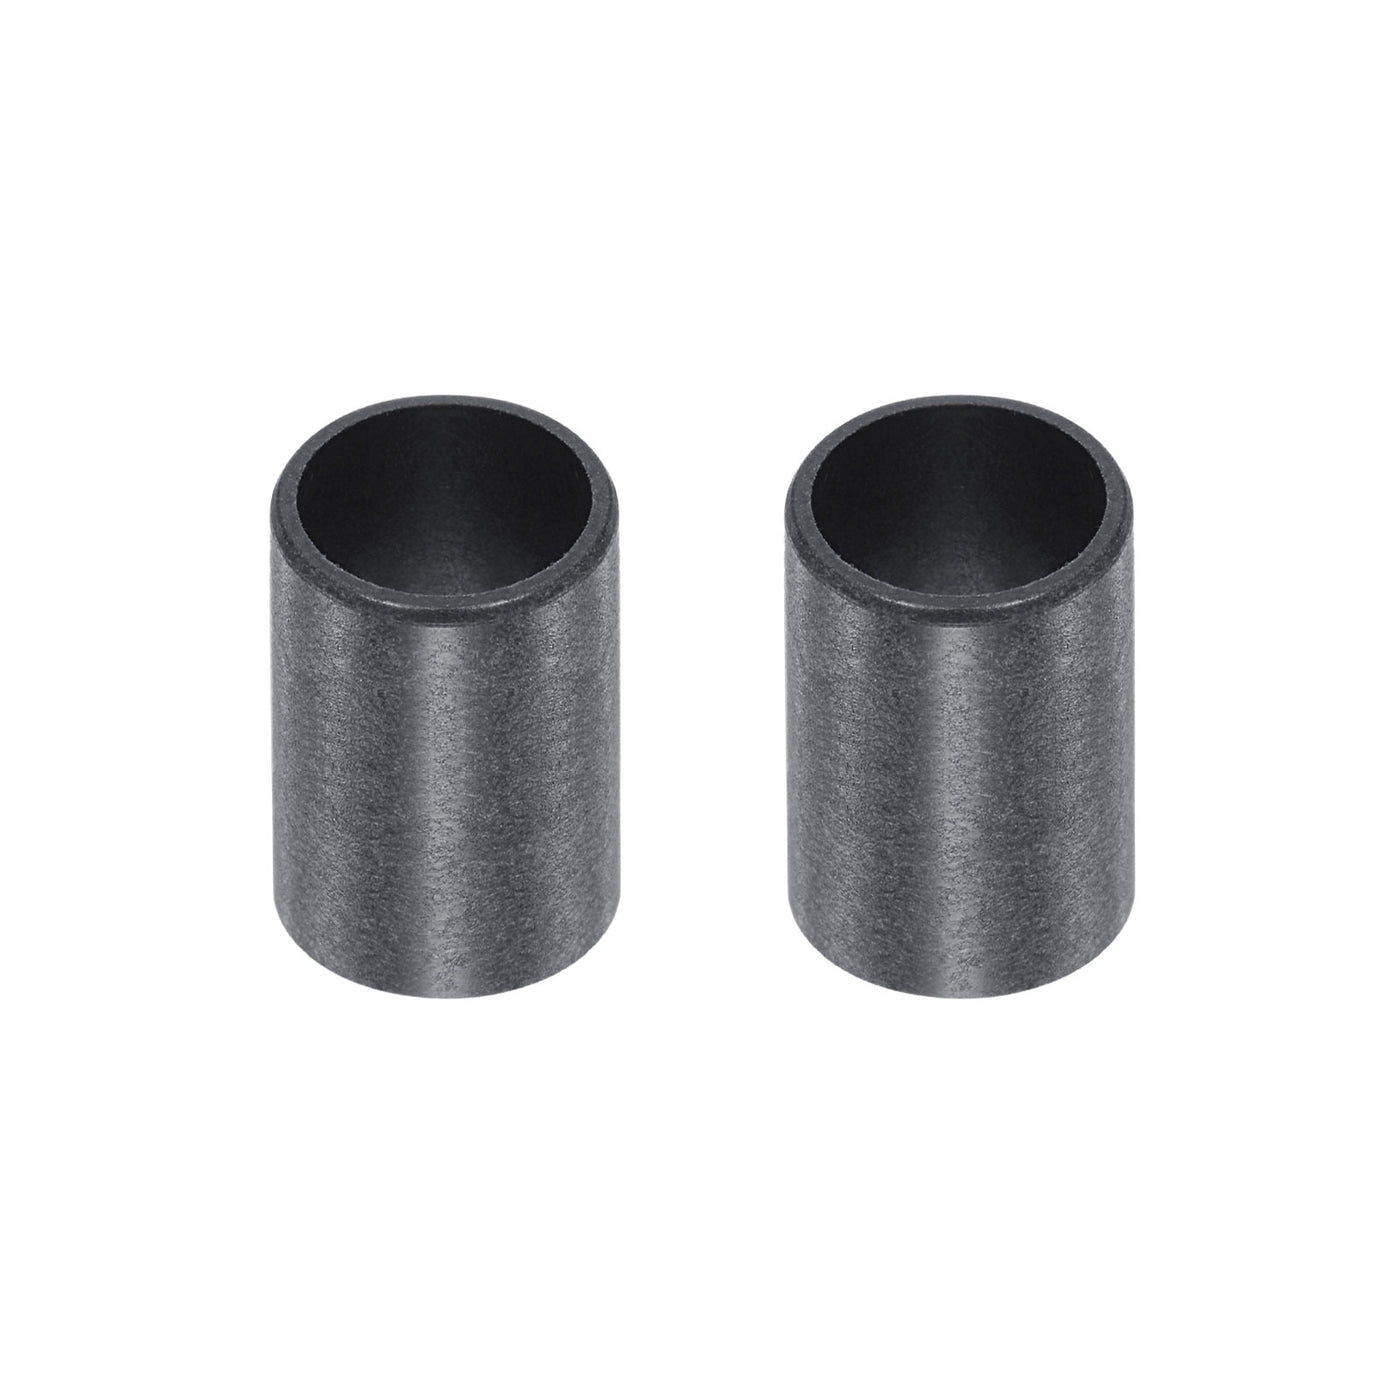 uxcell Uxcell Sleeve Bearings 10mmx12mmx20mm POM Wrapped Oilless Bushings Black 2pcs